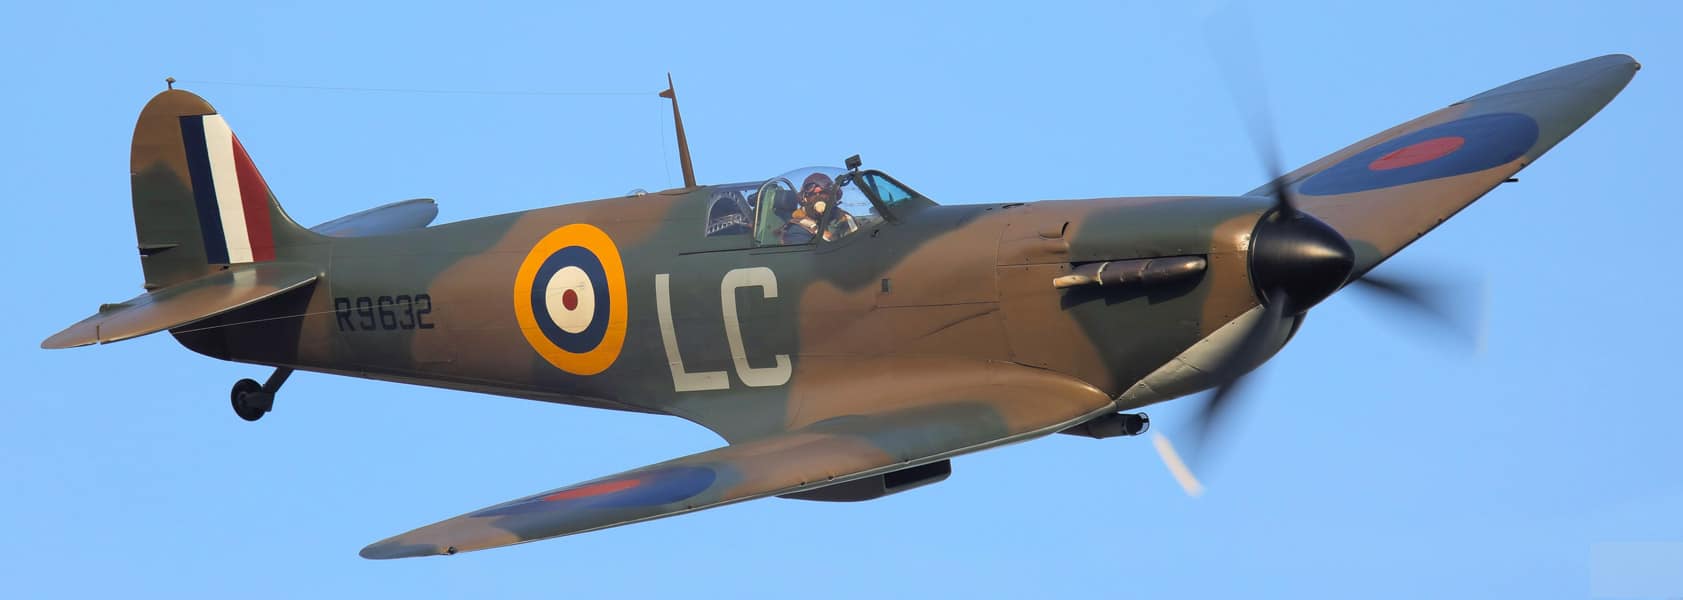 A Supermarine Spitfire used in the movie Dunkirk